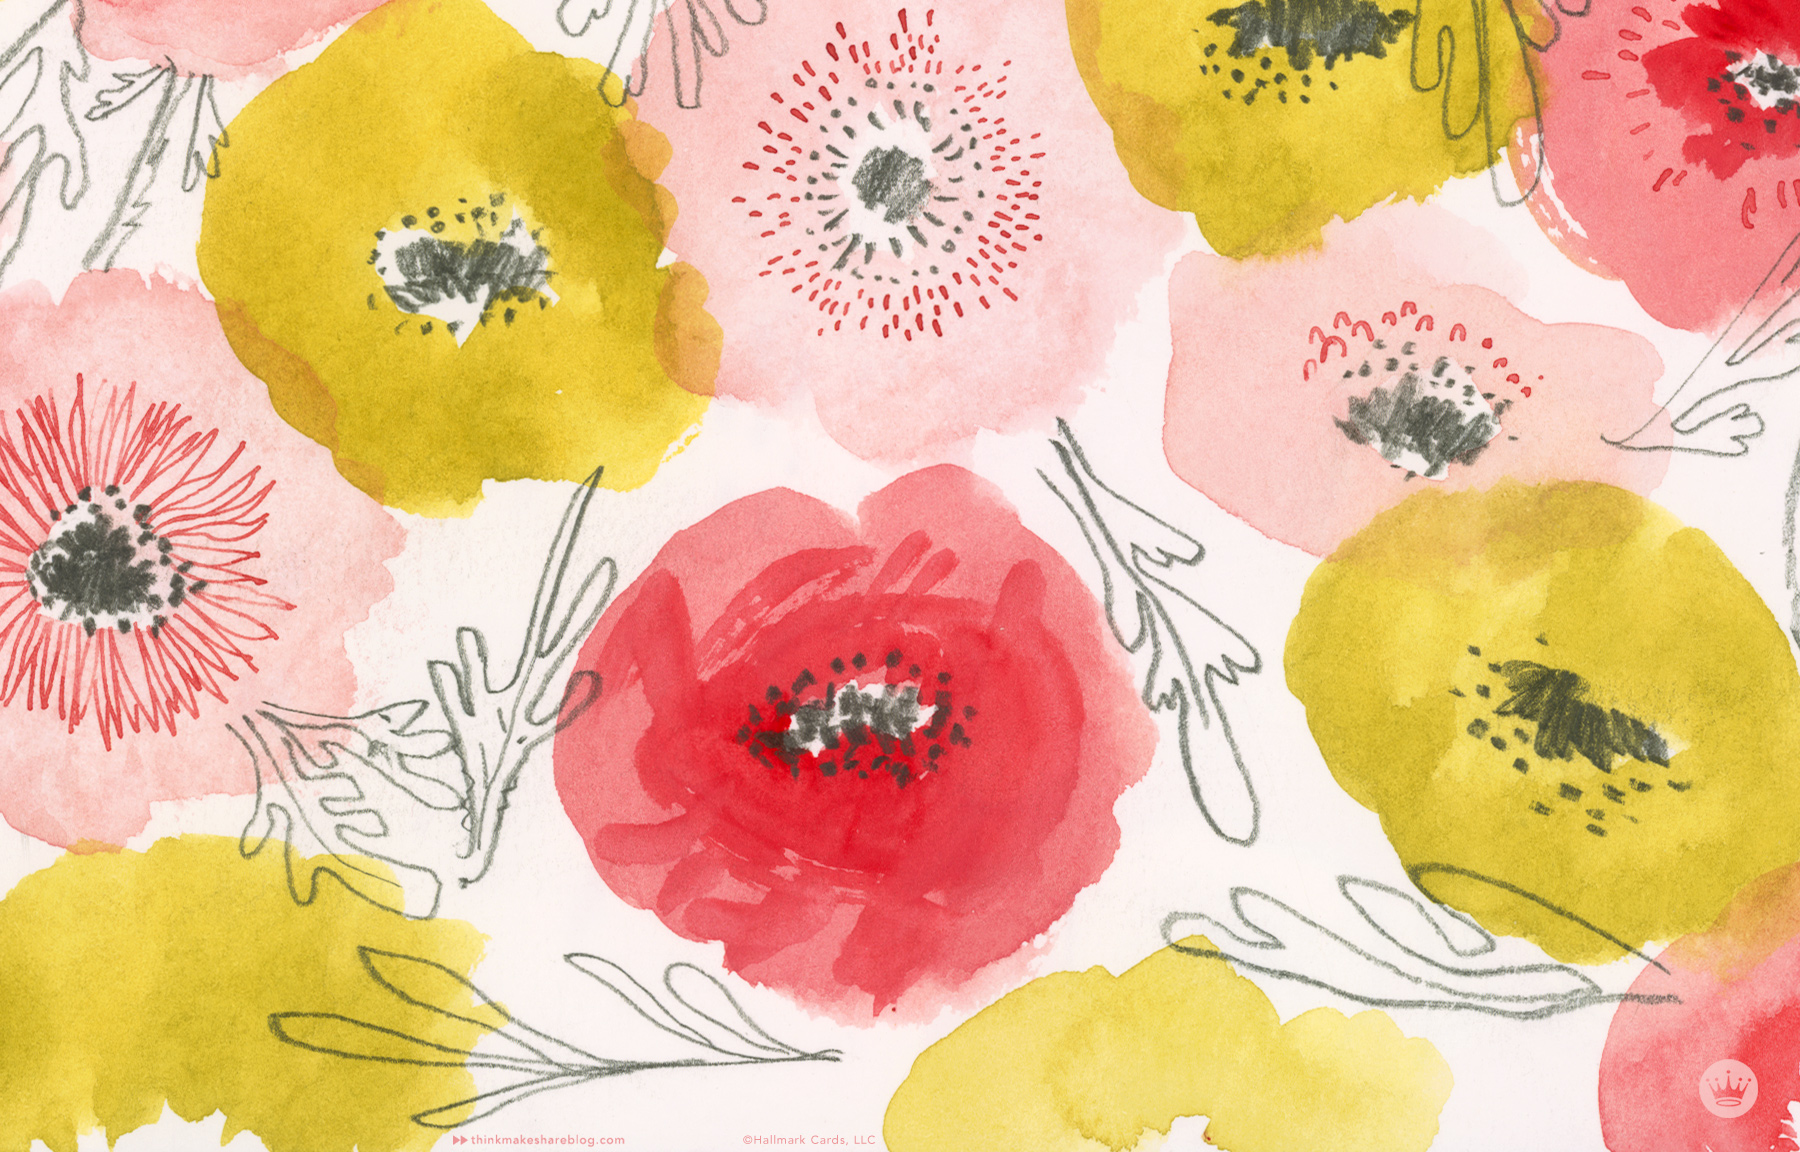 Three digital wallpaper and a playlist for Spring.Make.Share